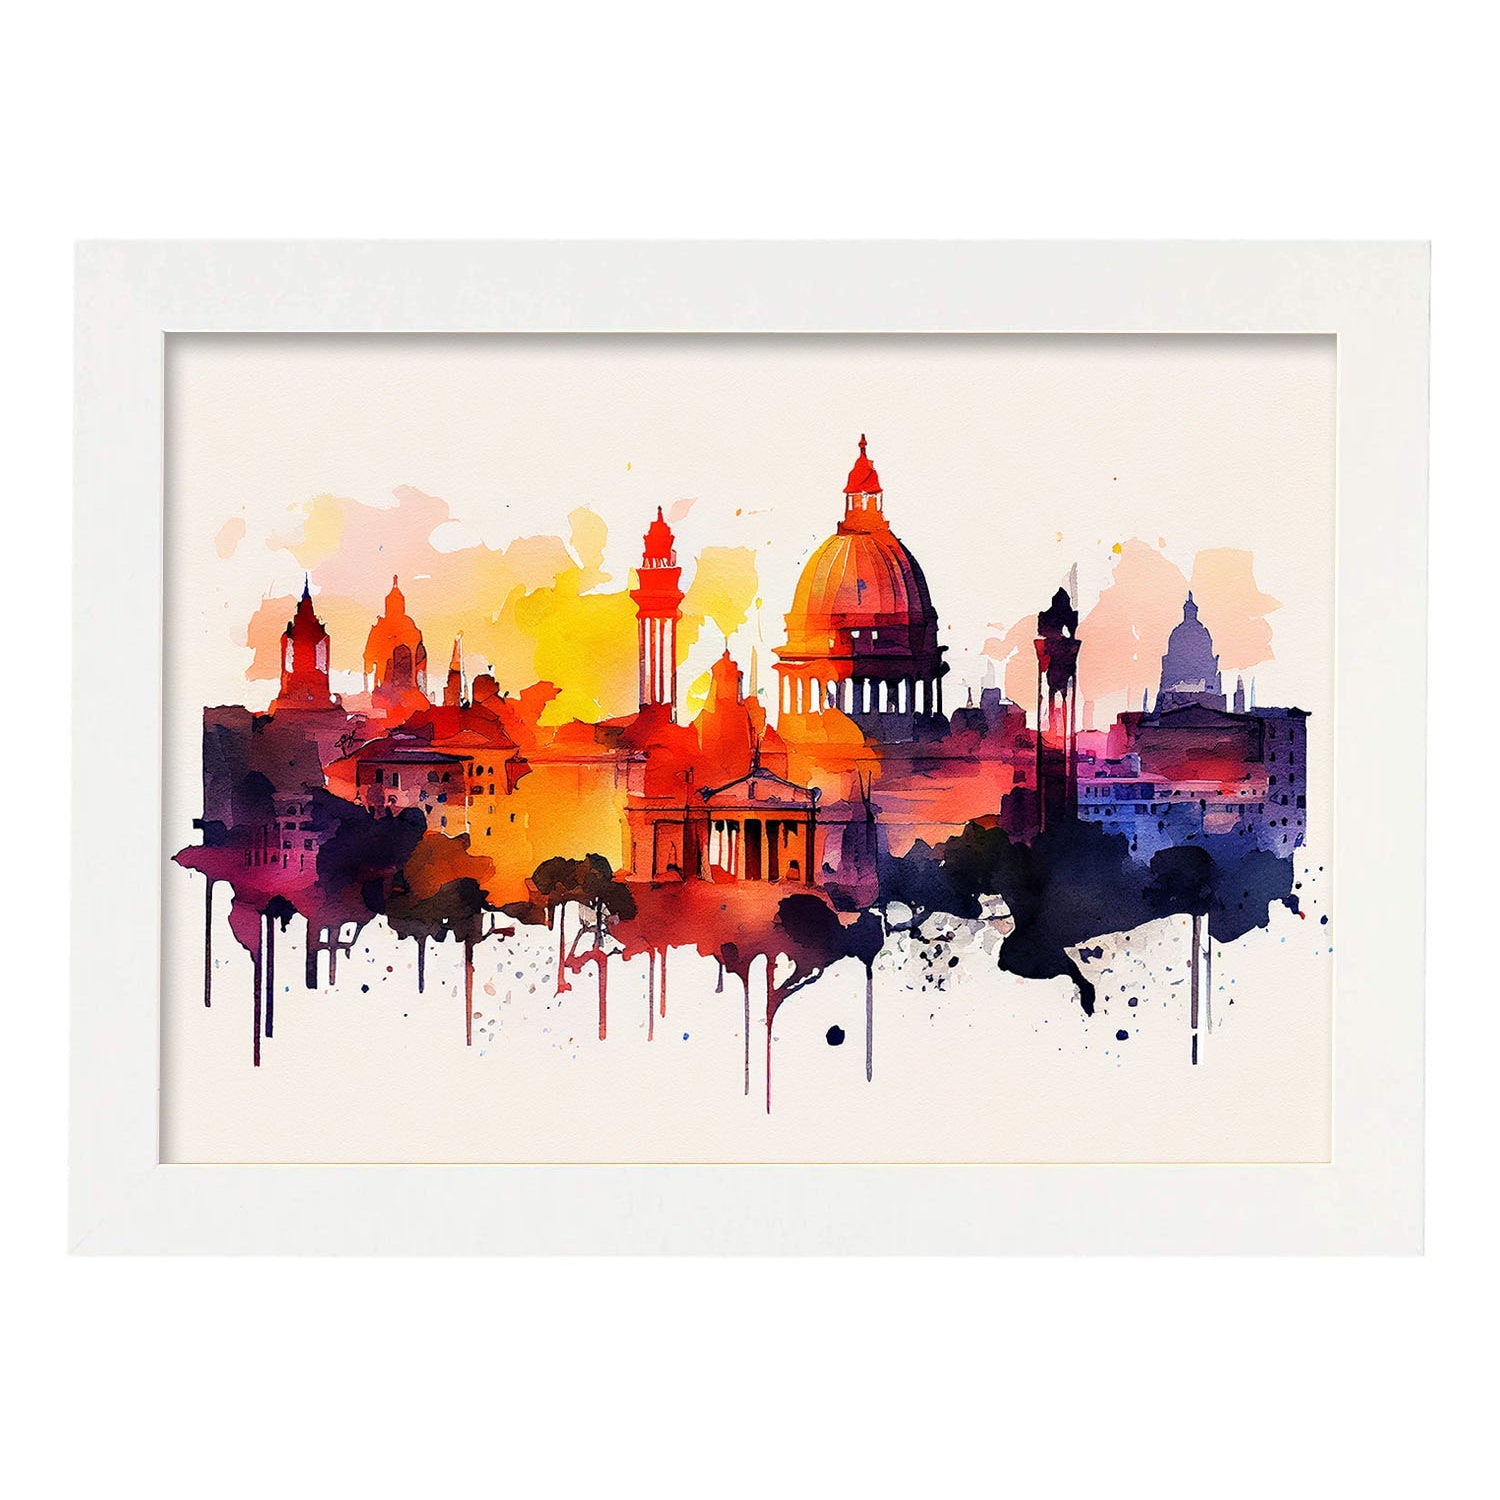 Nacnic watercolor of a skyline of the city of Rome_3. Aesthetic Wall Art Prints for Bedroom or Living Room Design.-Artwork-Nacnic-A4-Marco Blanco-Nacnic Estudio SL